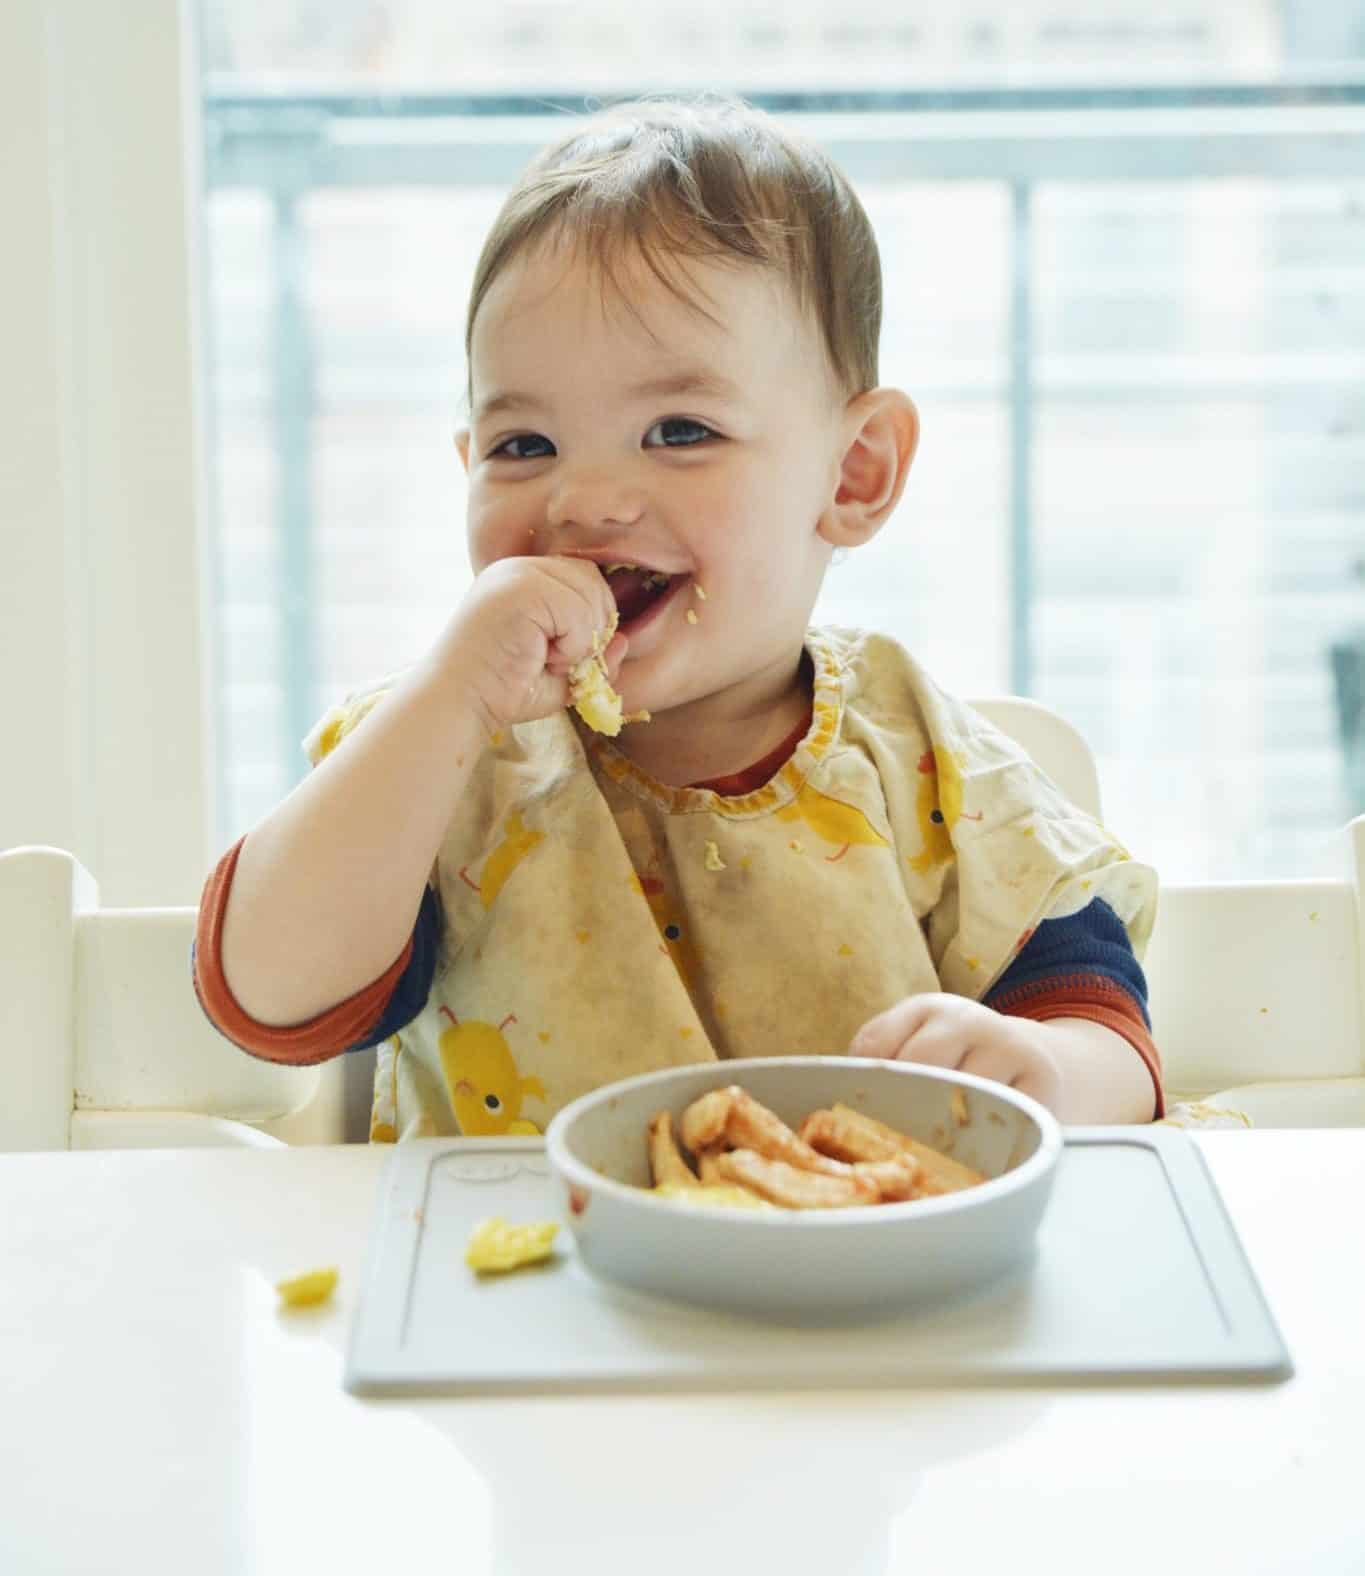 What Baby-Led Weaning?